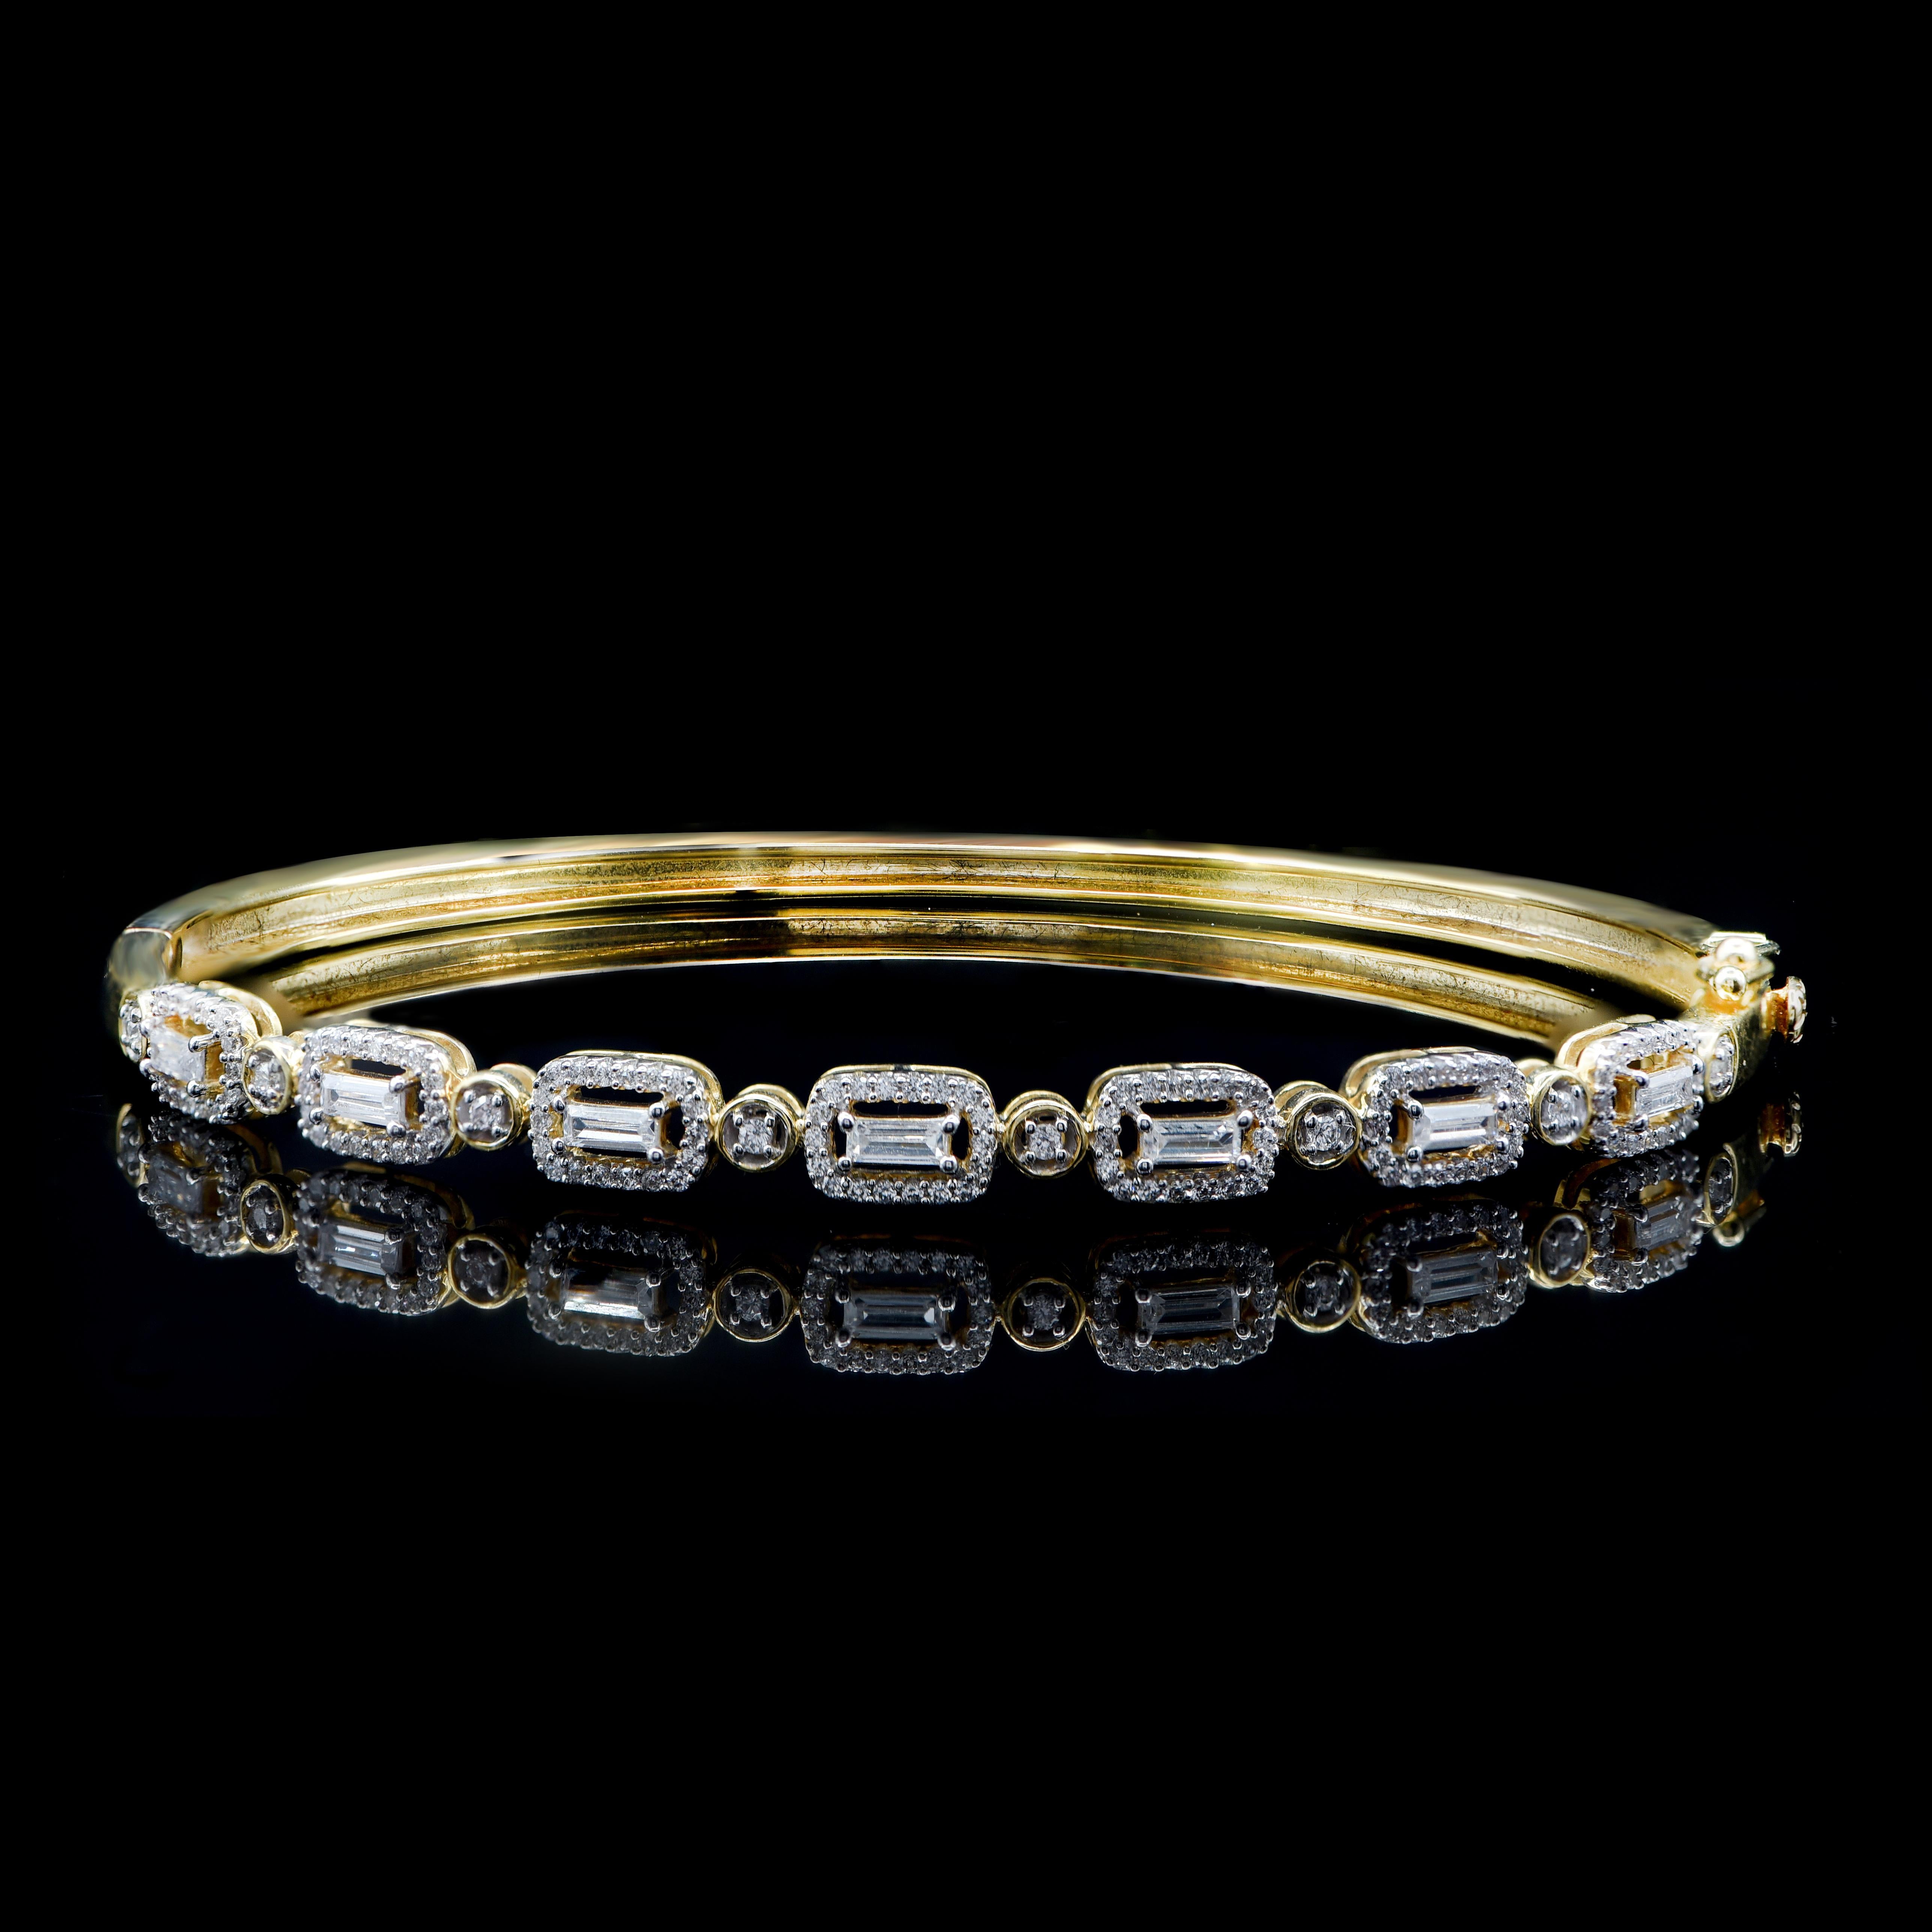 This classic design features 134 brilliant cut and 7 baguette-cut natural diamonds elegantly set in stackable prong and prong setting and hand-crafted by our experts in 18-karat yellow gold. The diamonds are graded H-I Color, I2 Clarity. 
The